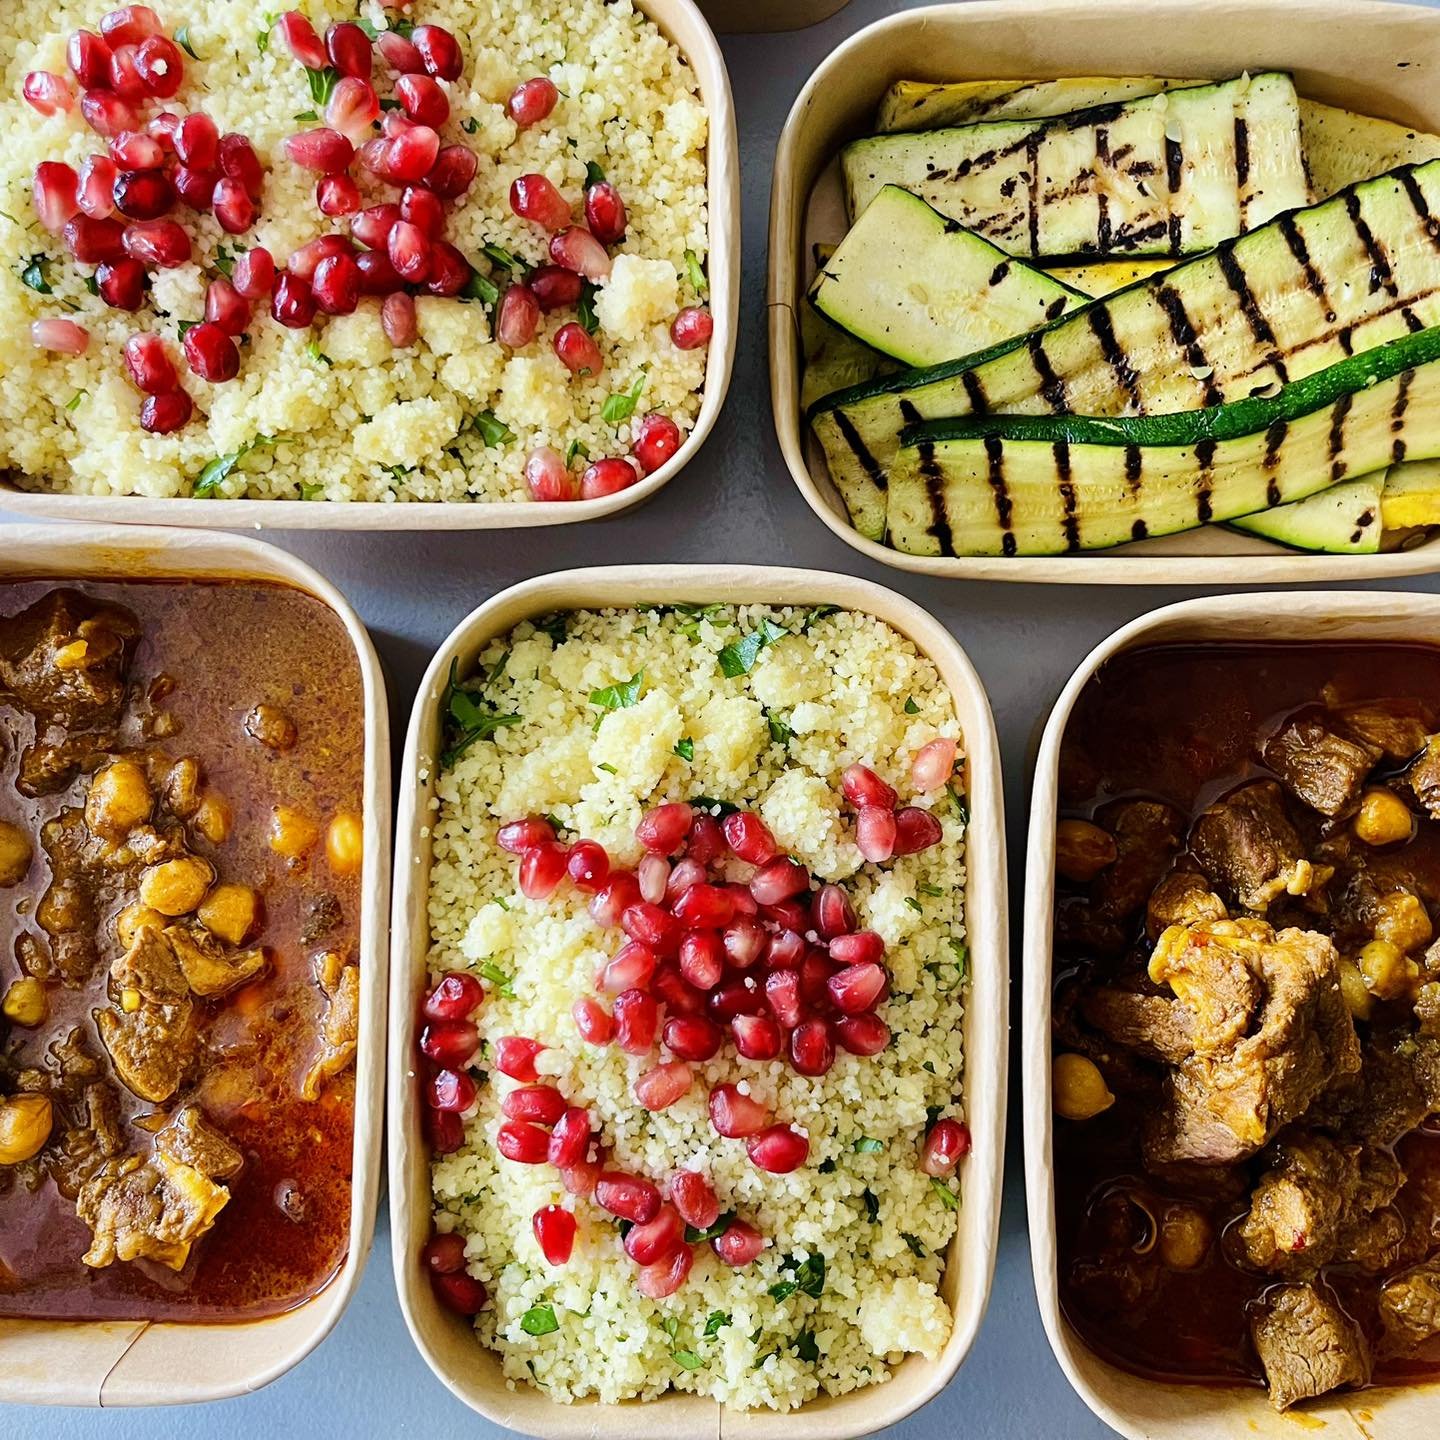 ORDER UP : Moroccan Lamb Tagine, Couscous with Pomegranate , Grilled Zucchini and Squash 🇲🇦

#globalcuisine #foodporn #appleton #greenbay #food #neenah #veteranowned #foodlover #veterans #letmecookforyou #home #madefromscratch #homedelivery #keyros